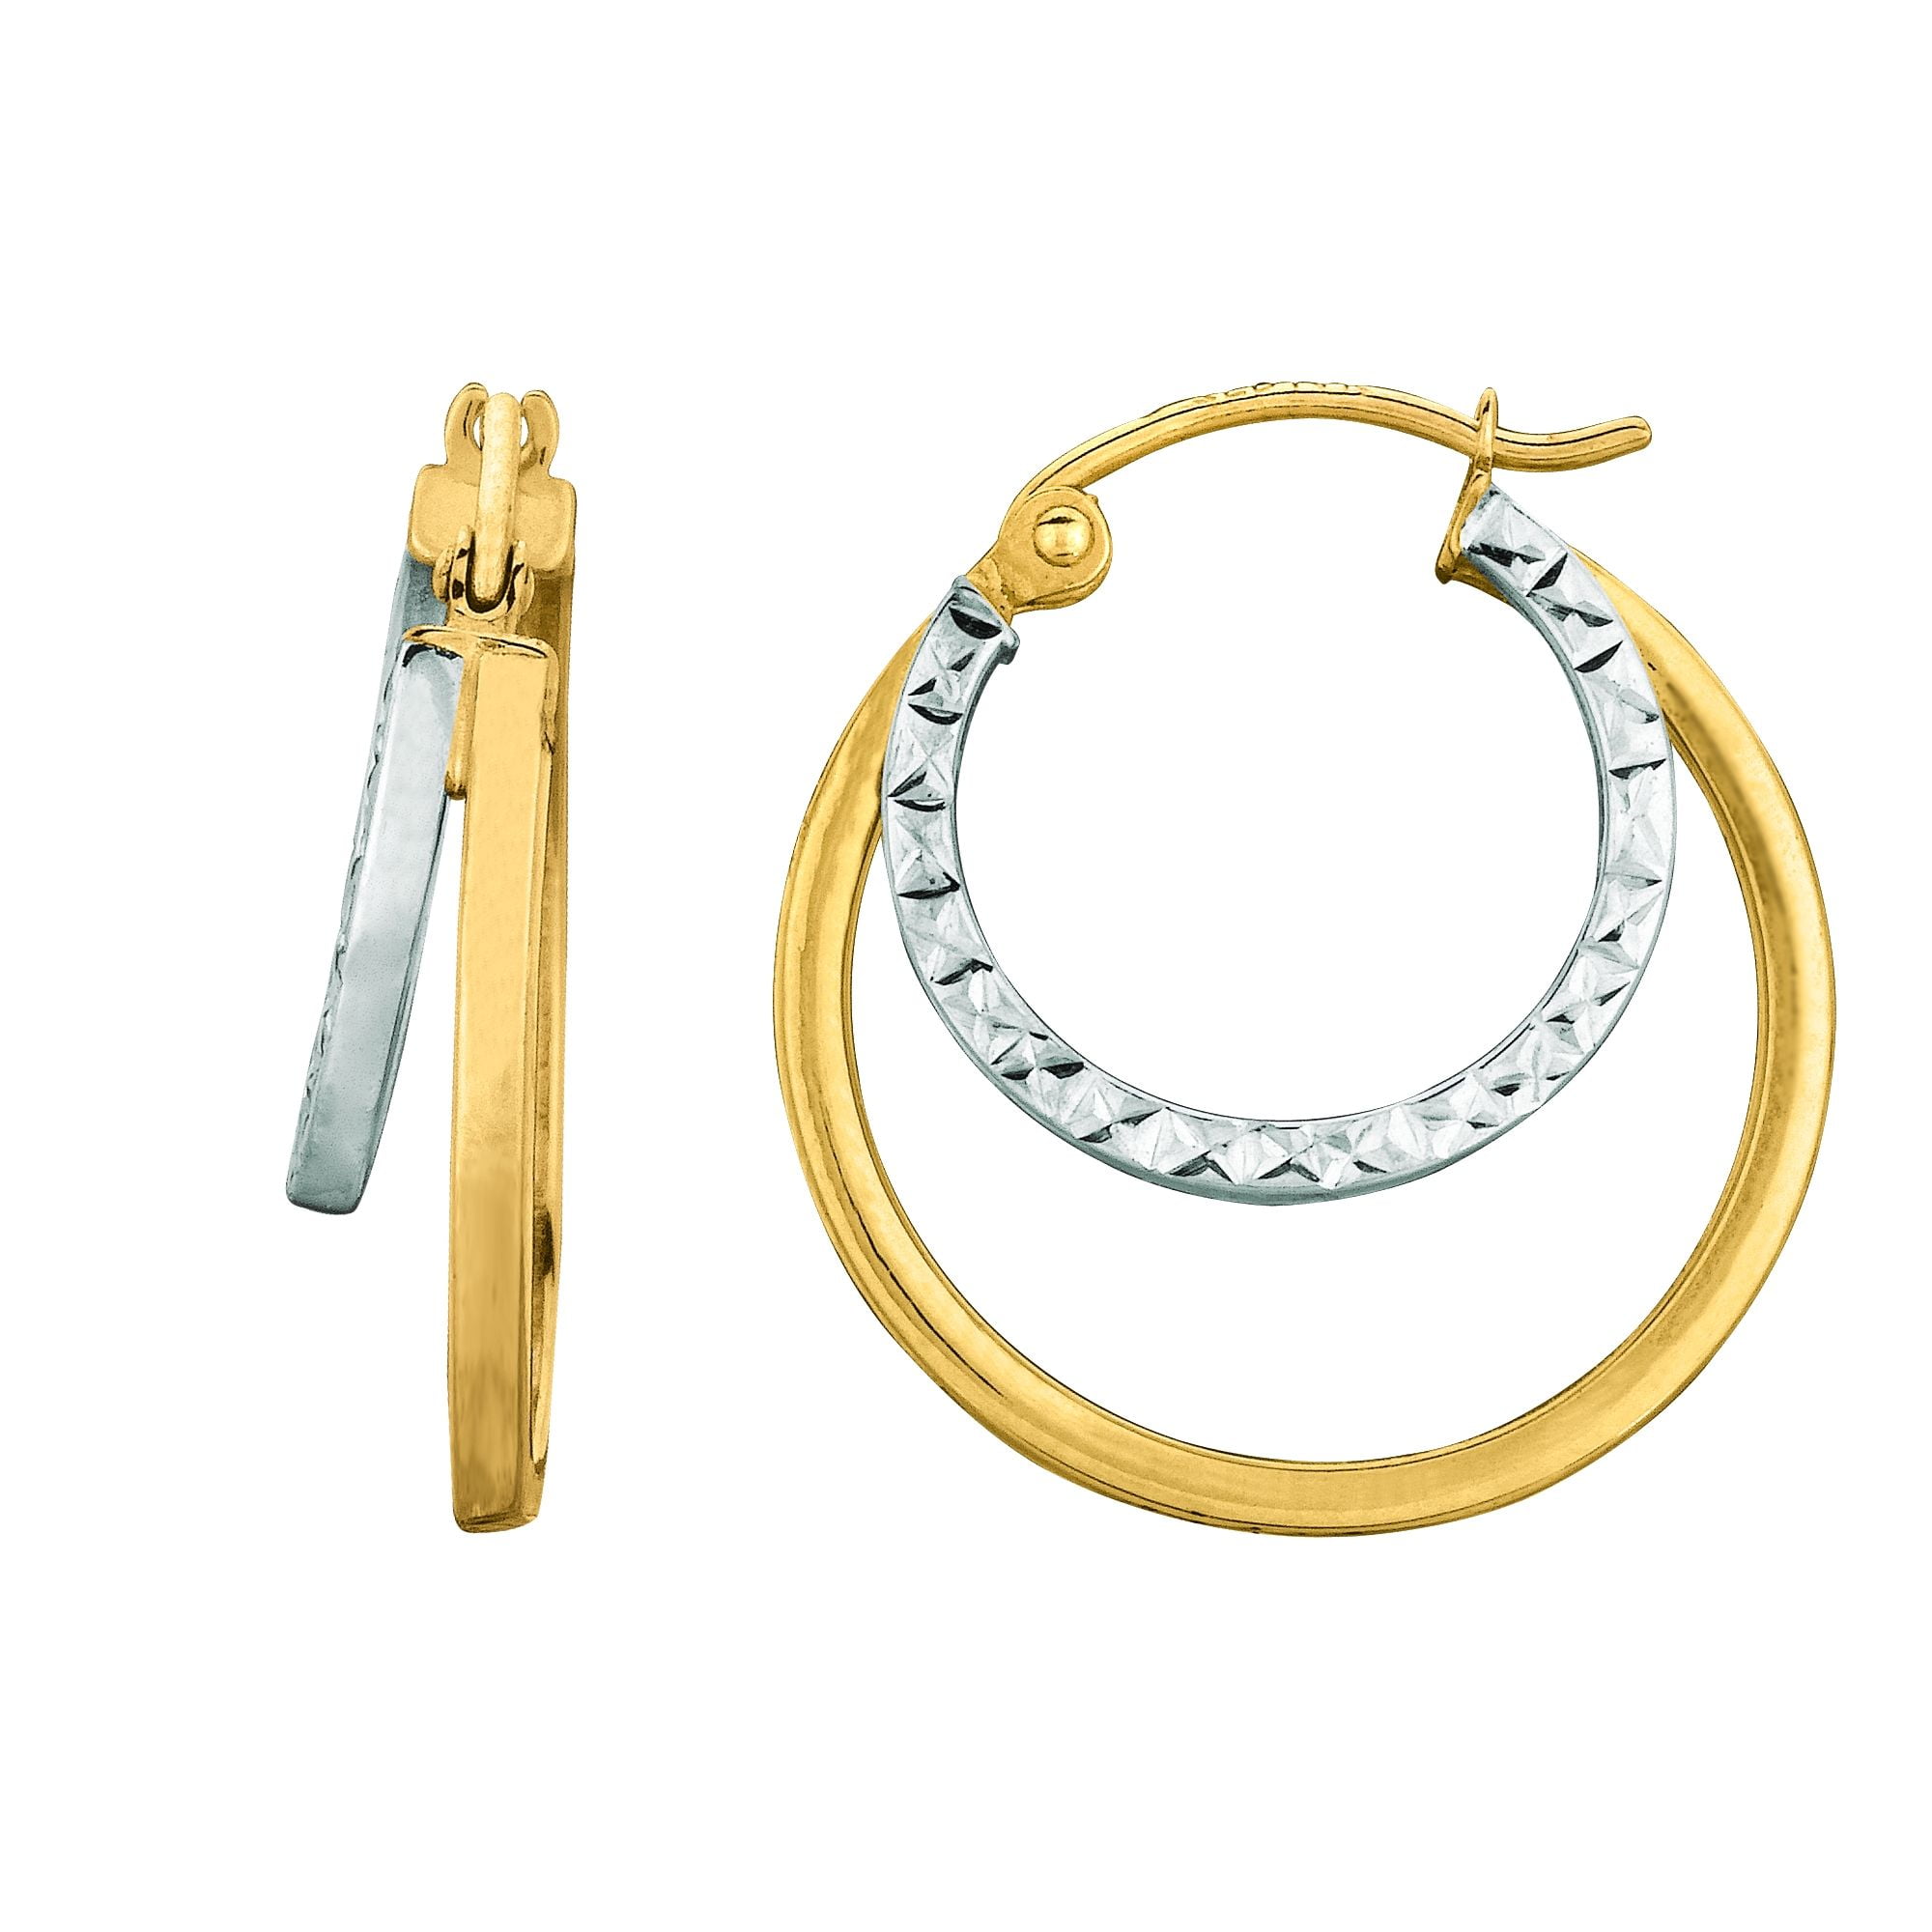 14K Yellow Gold Shiny Textured Round Hoop Earrings with Hinged by IcedTime